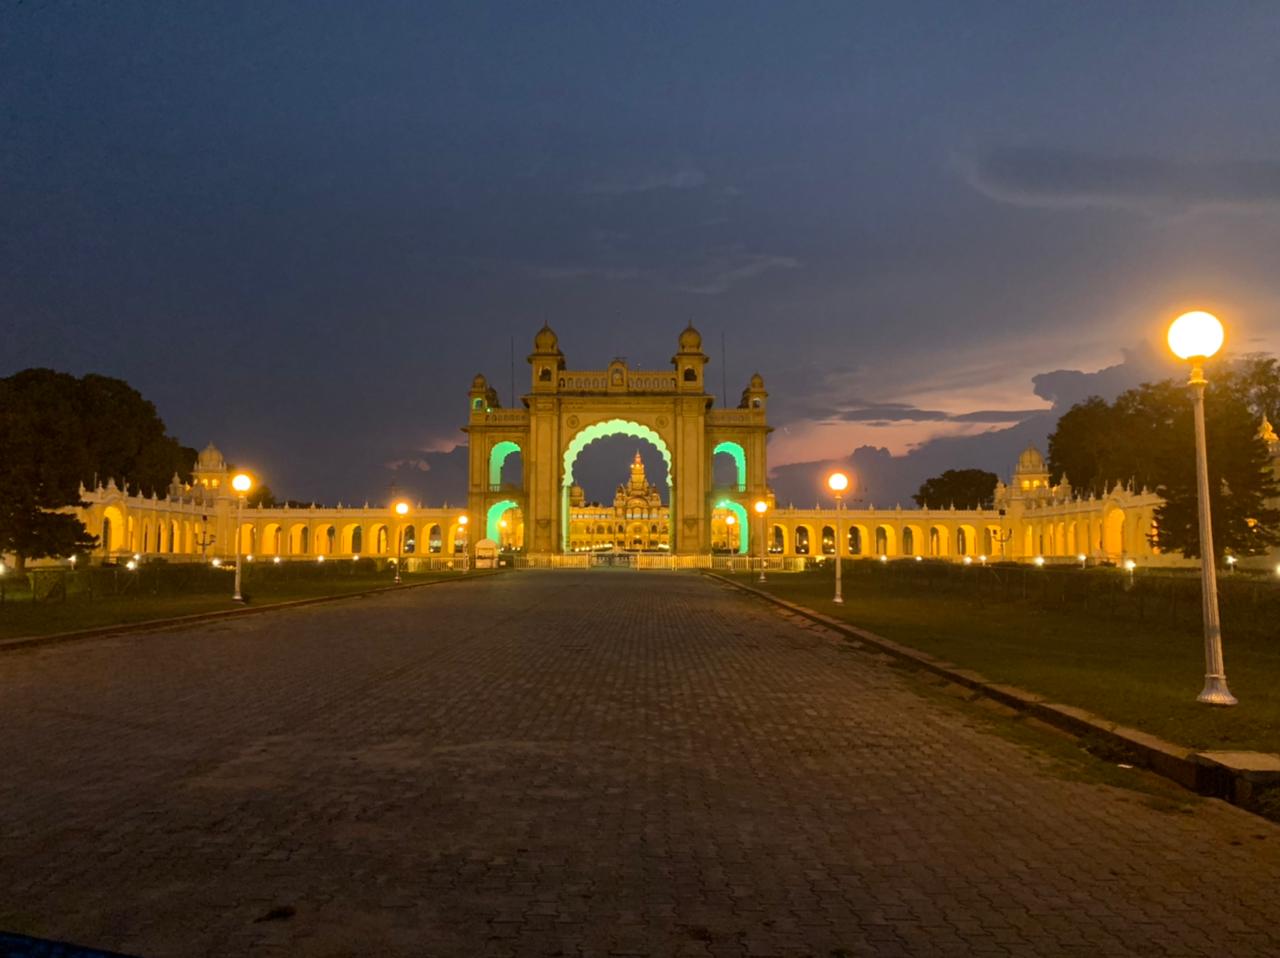 Spectacular illumination of Mysore Palace, one of the main attractions in the city